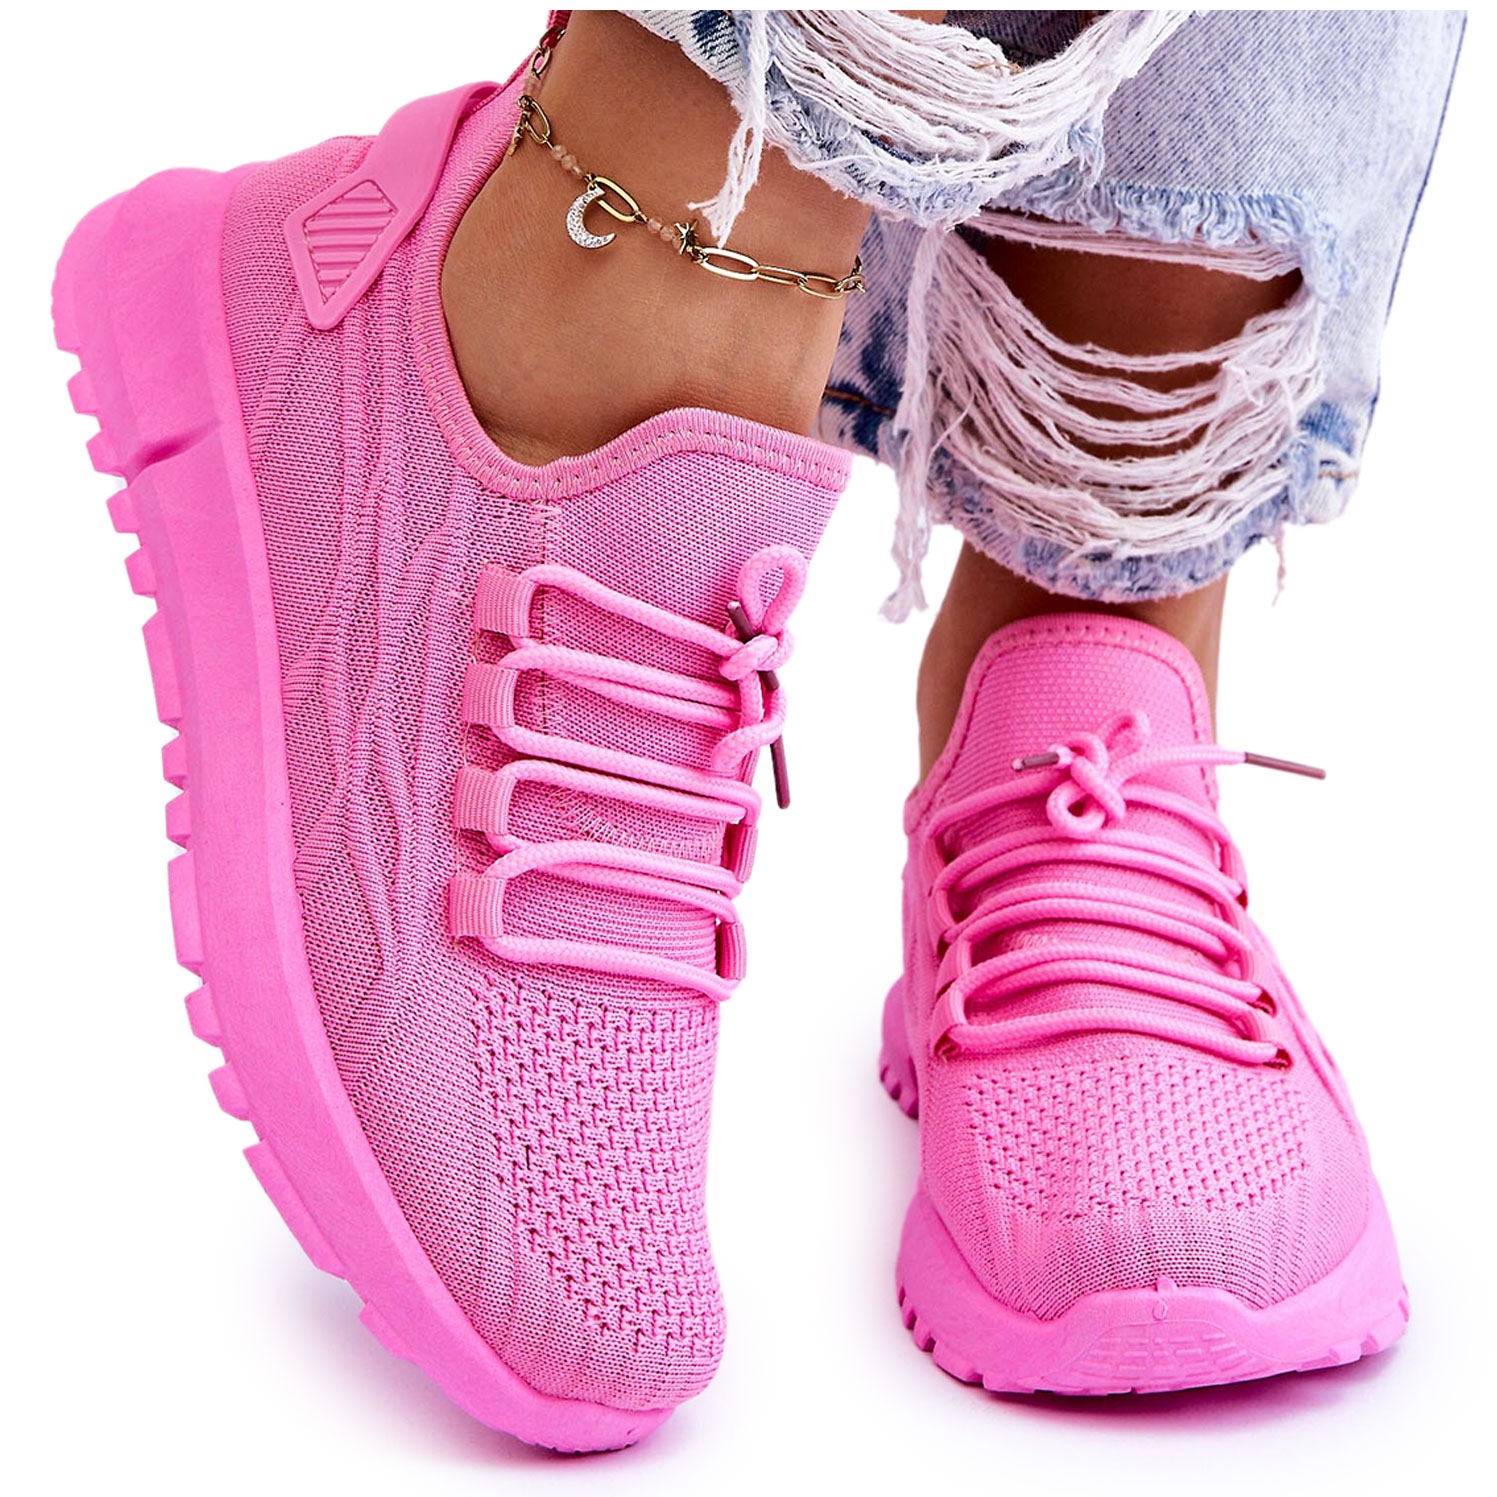 adidas Campus 00s Shoes - Pink | Women's Lifestyle | adidas US